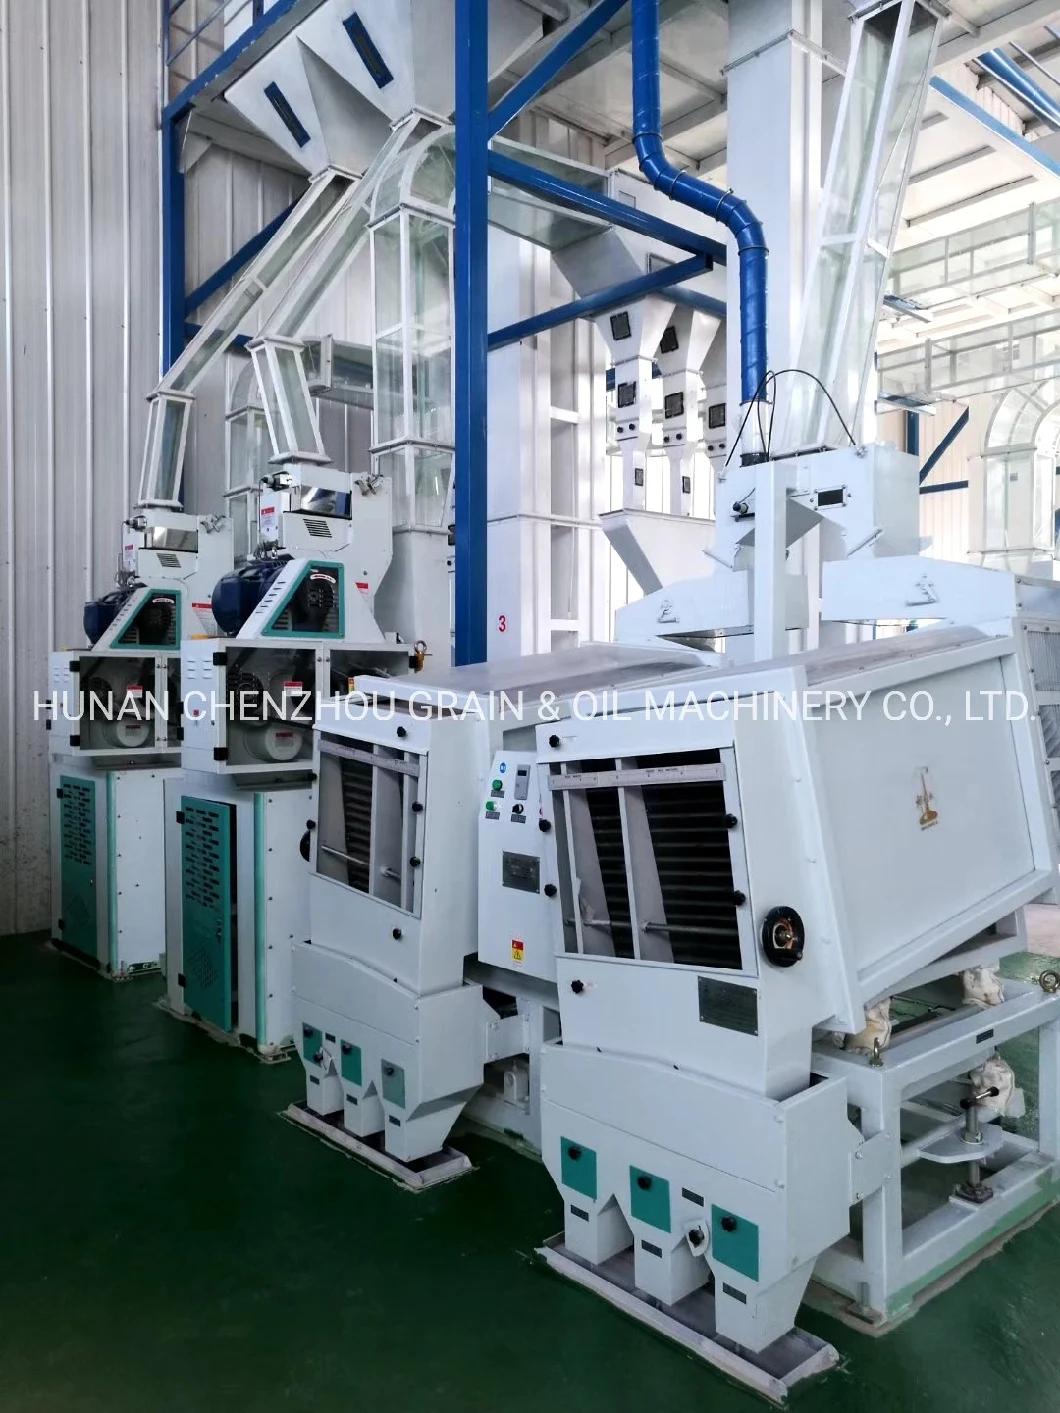 Clj Small Yellow Rice Process Professional Auto Rice Mill /Maize Mill/Millet Mill